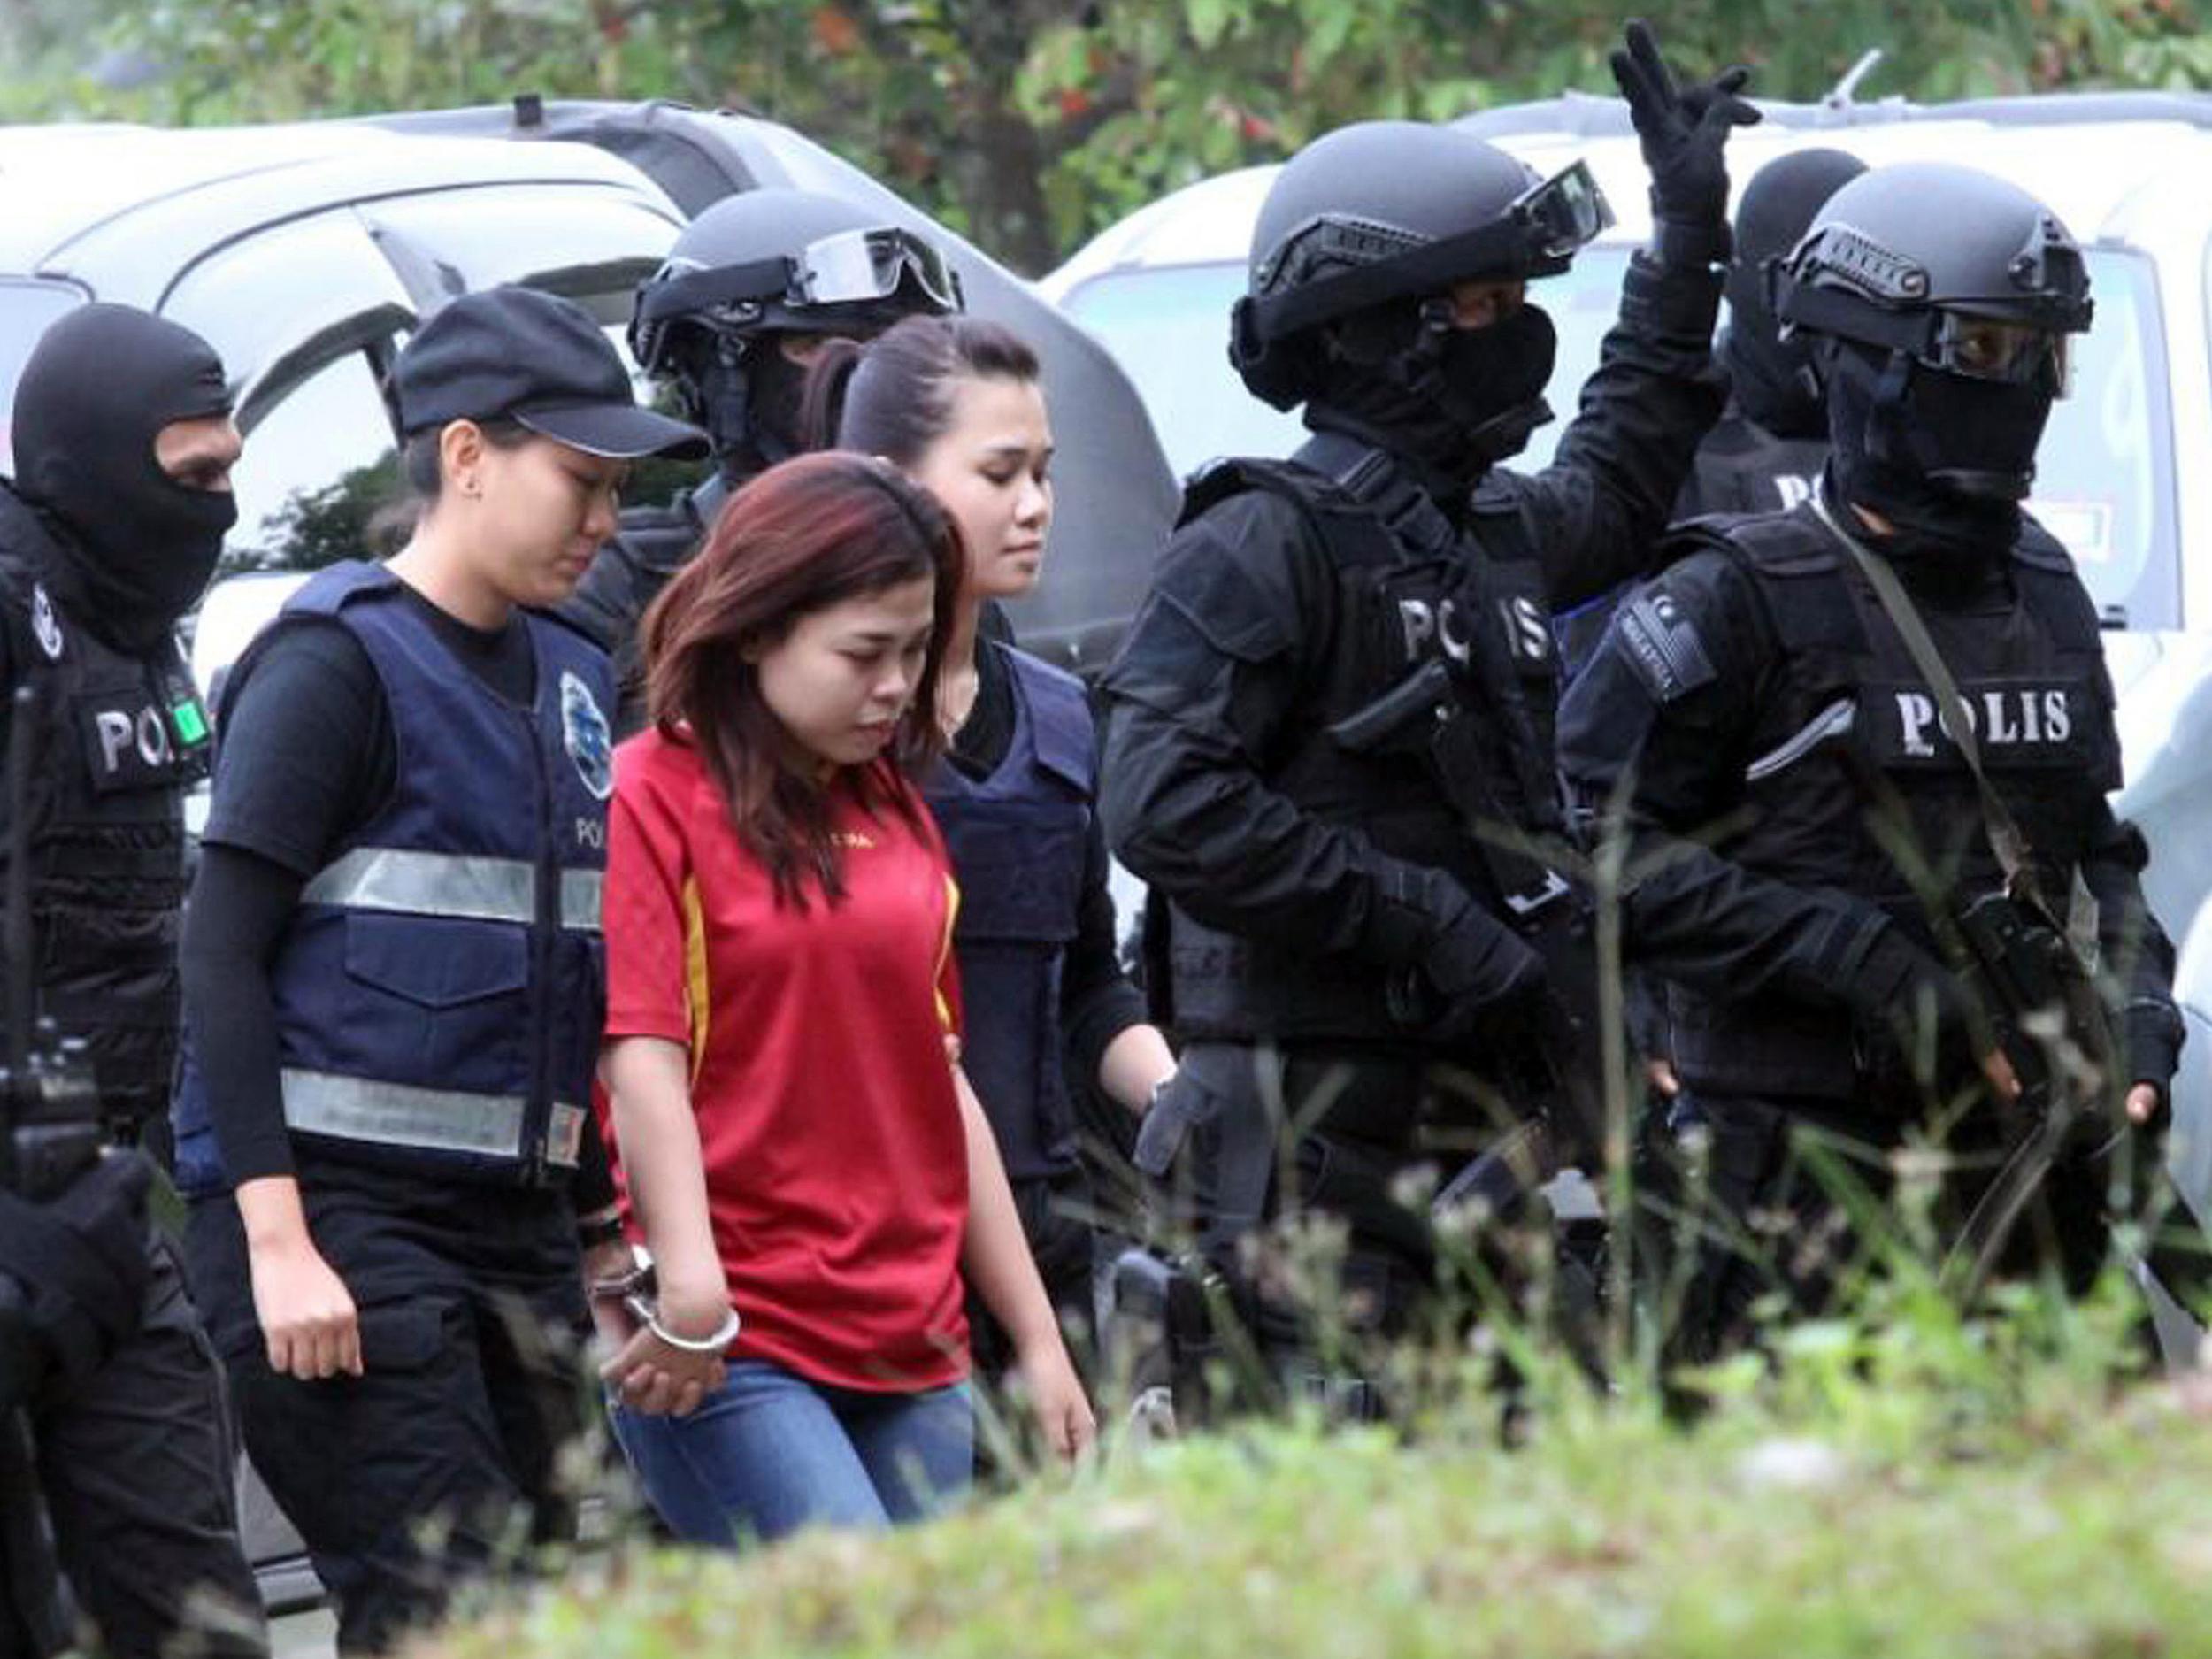 Kim Jong Nam Assassination Two Female Suspects Charged With Murder Appear In Malaysian Court In